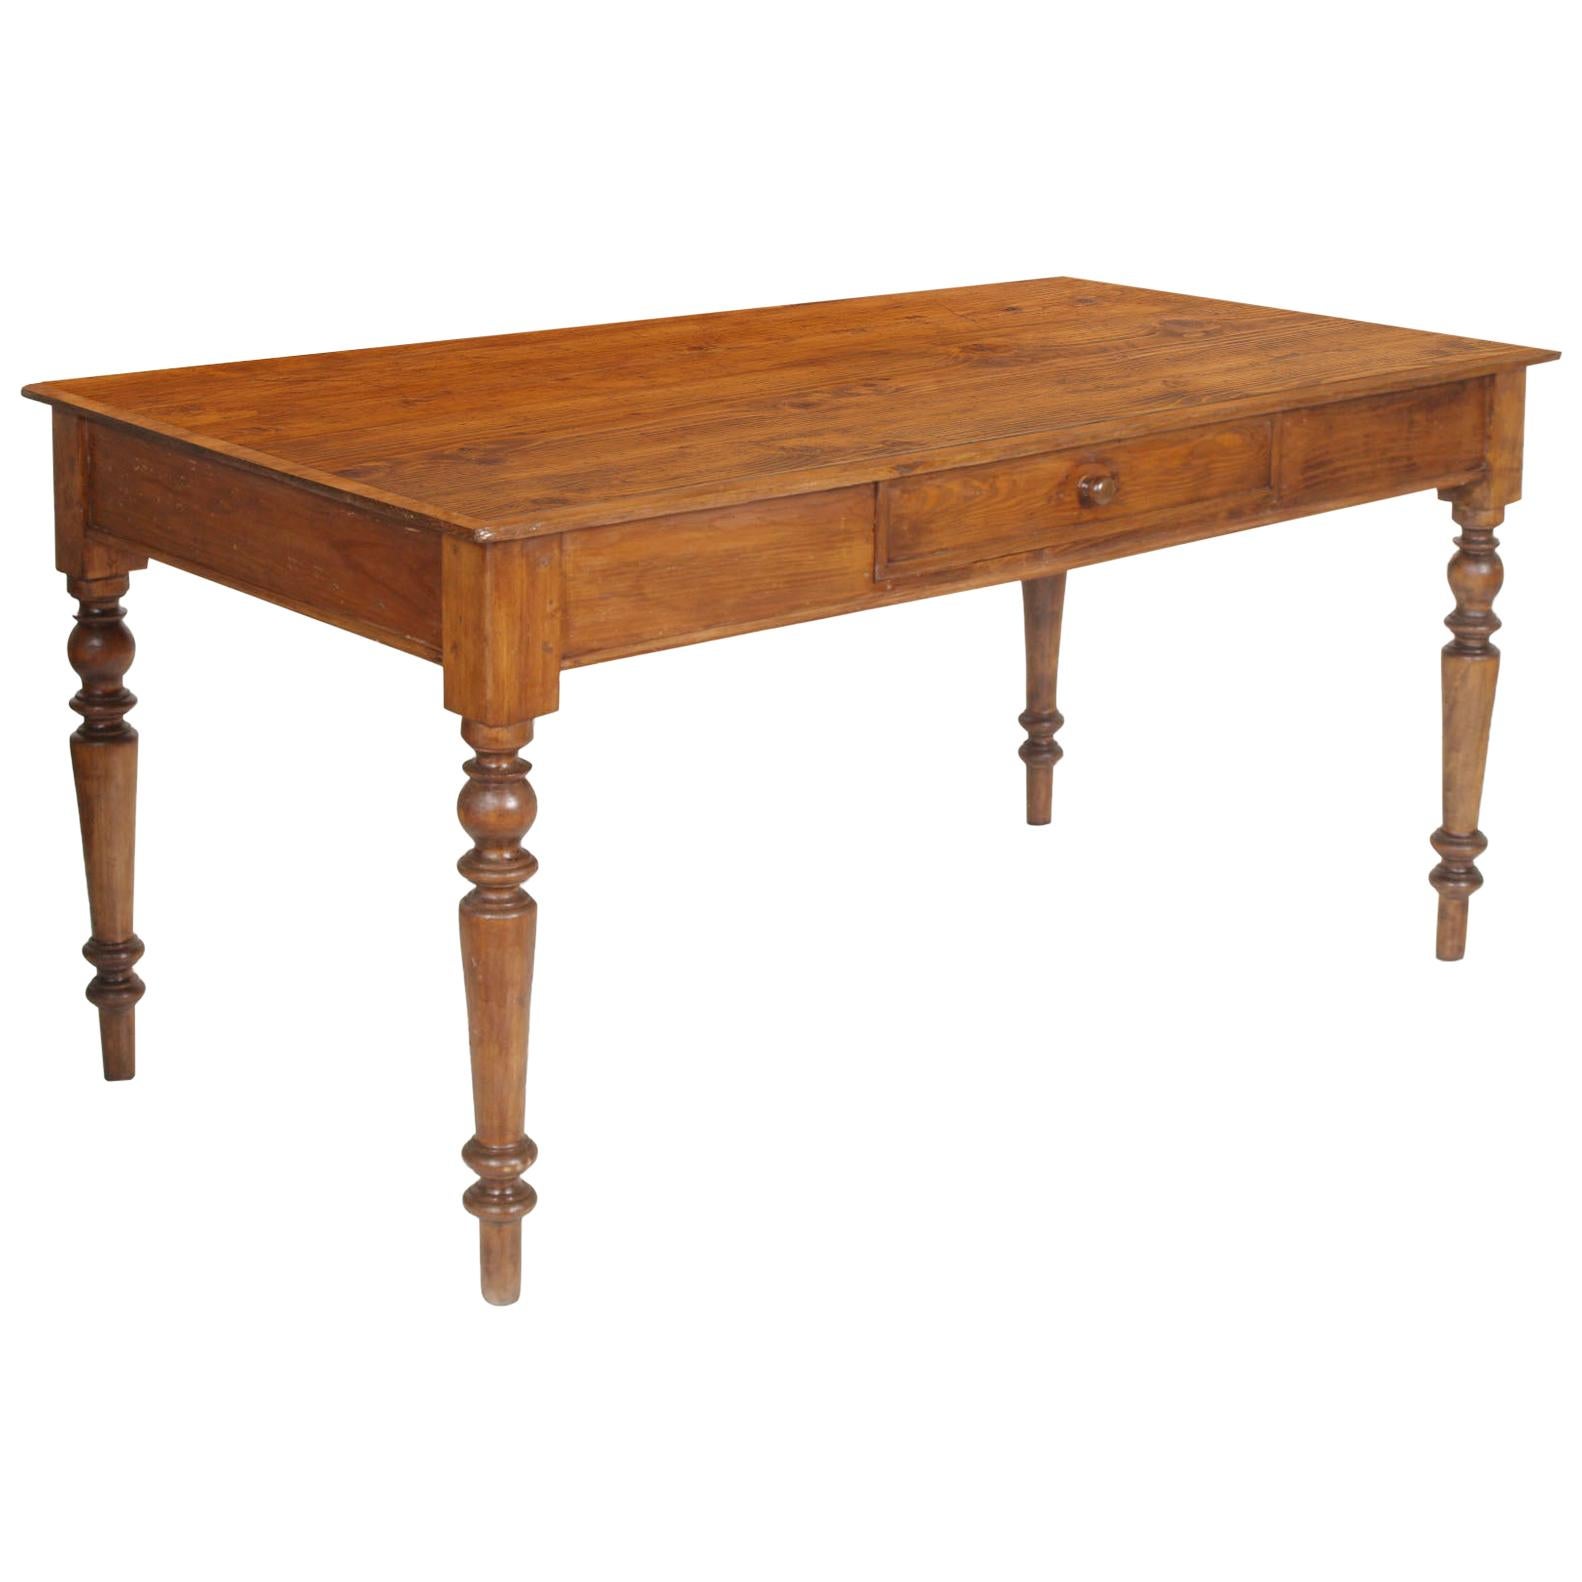 1850s Italian Country Neoclassic Rustic Table Desk, One Drawer, Wax-Polished For Sale